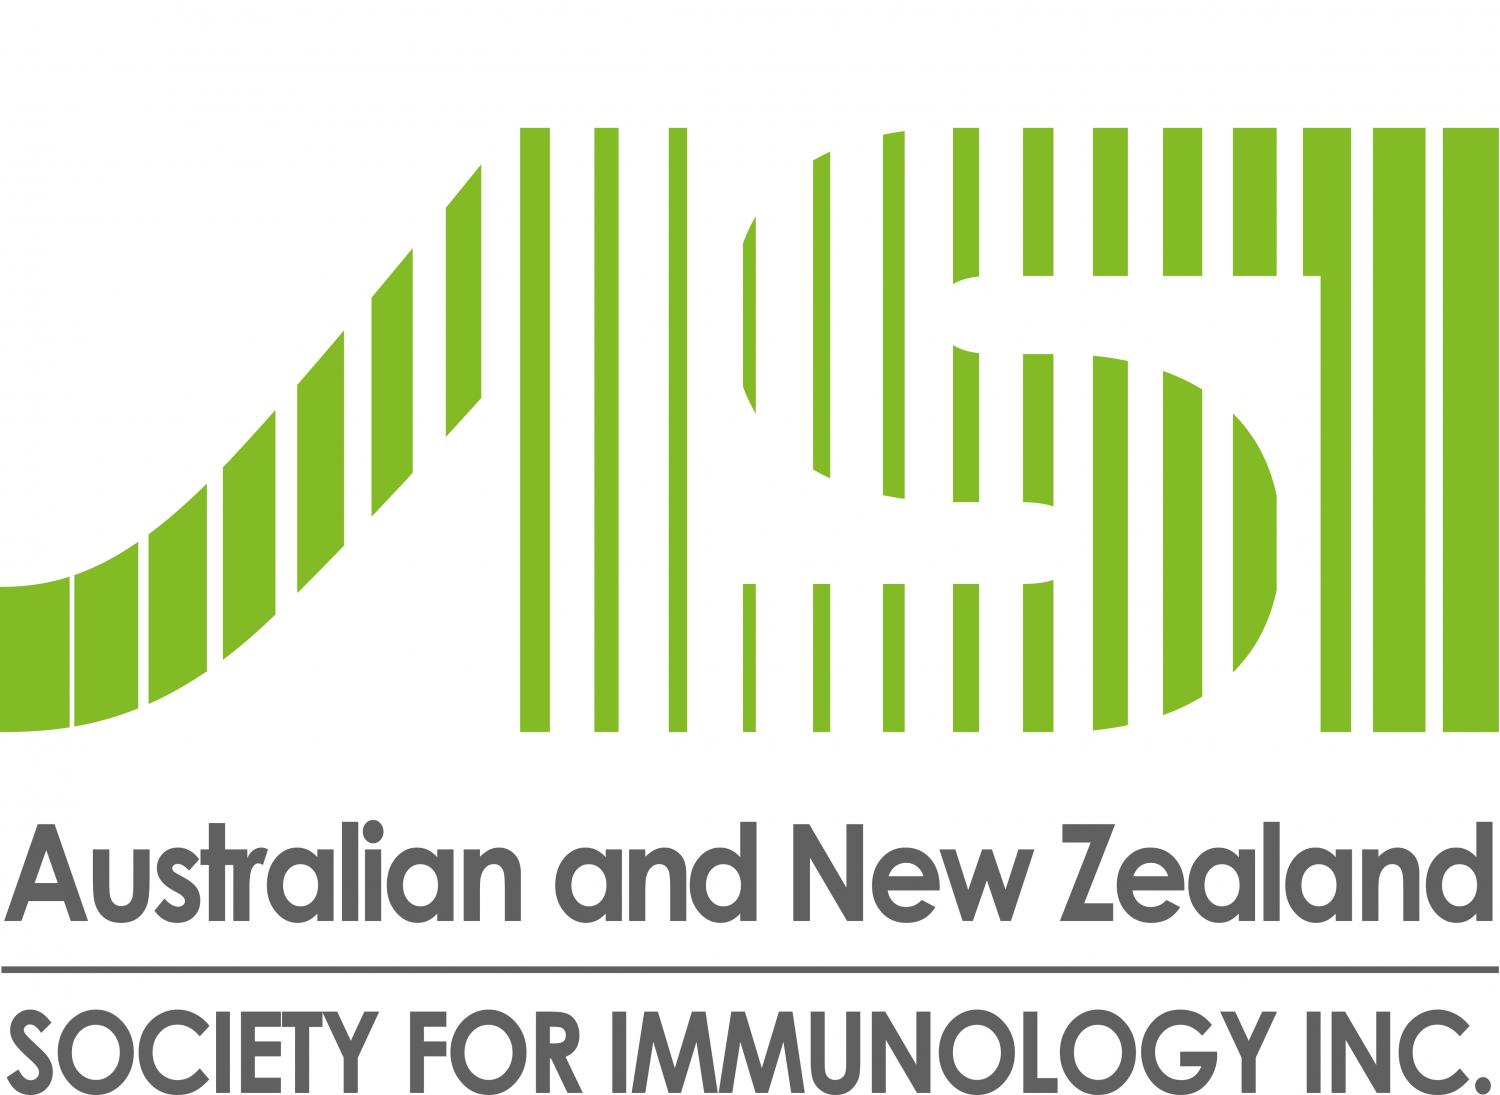 Thumbnail for 2021 Perth Immunology Group Meeting 